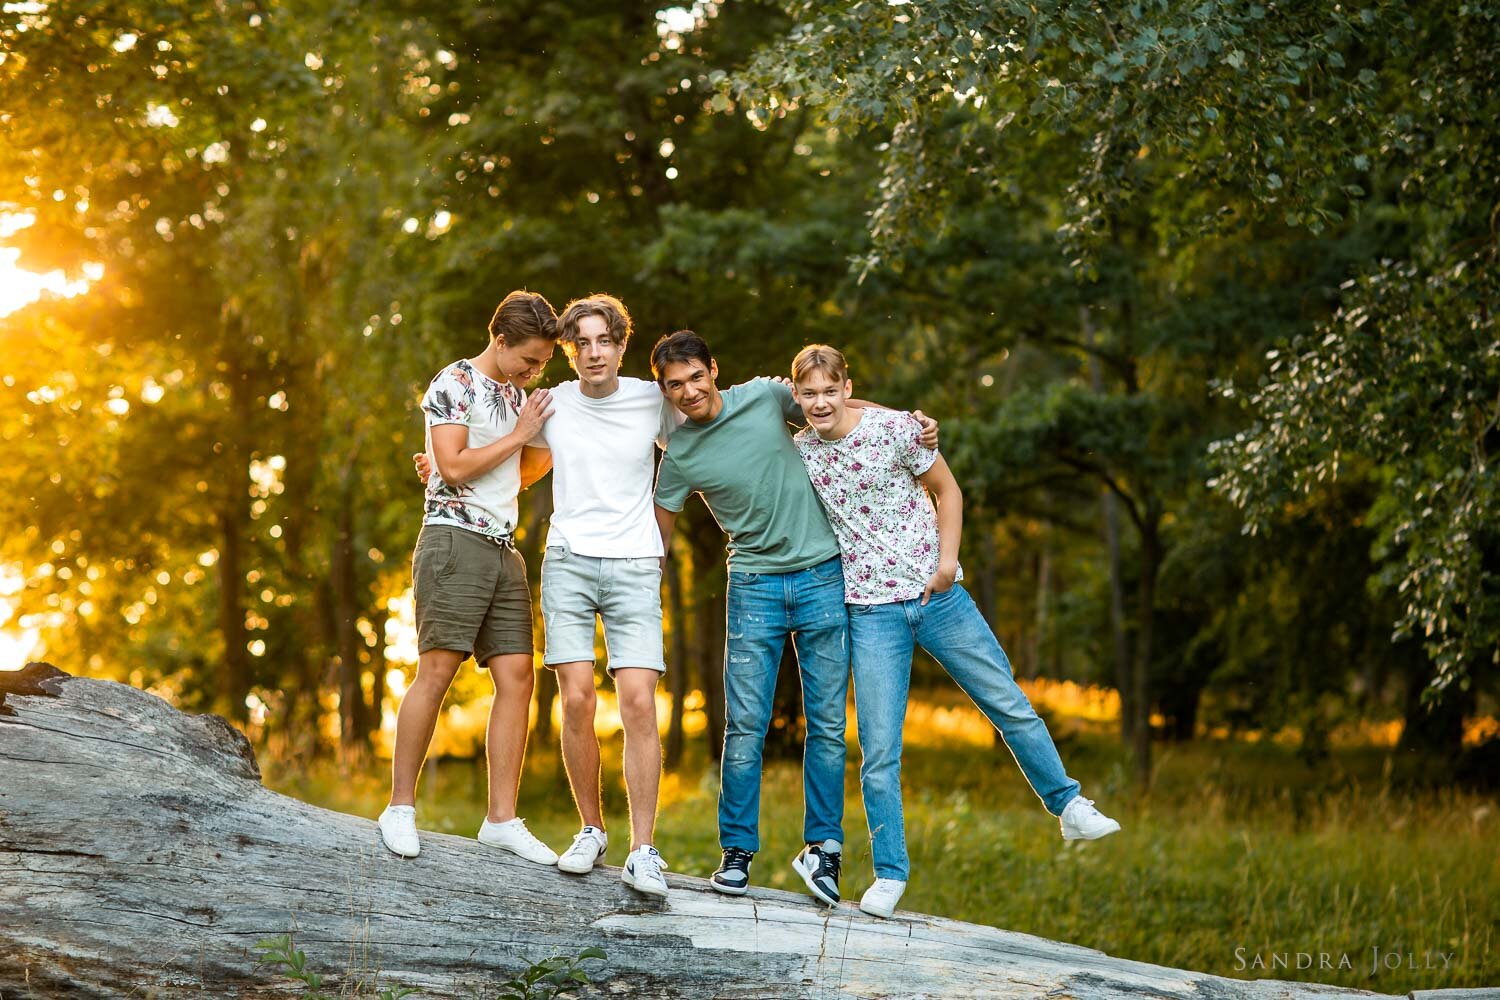 fun-teenage-friends-photo-session-in-stockholm-by-sandra-jolly-photography.jpg